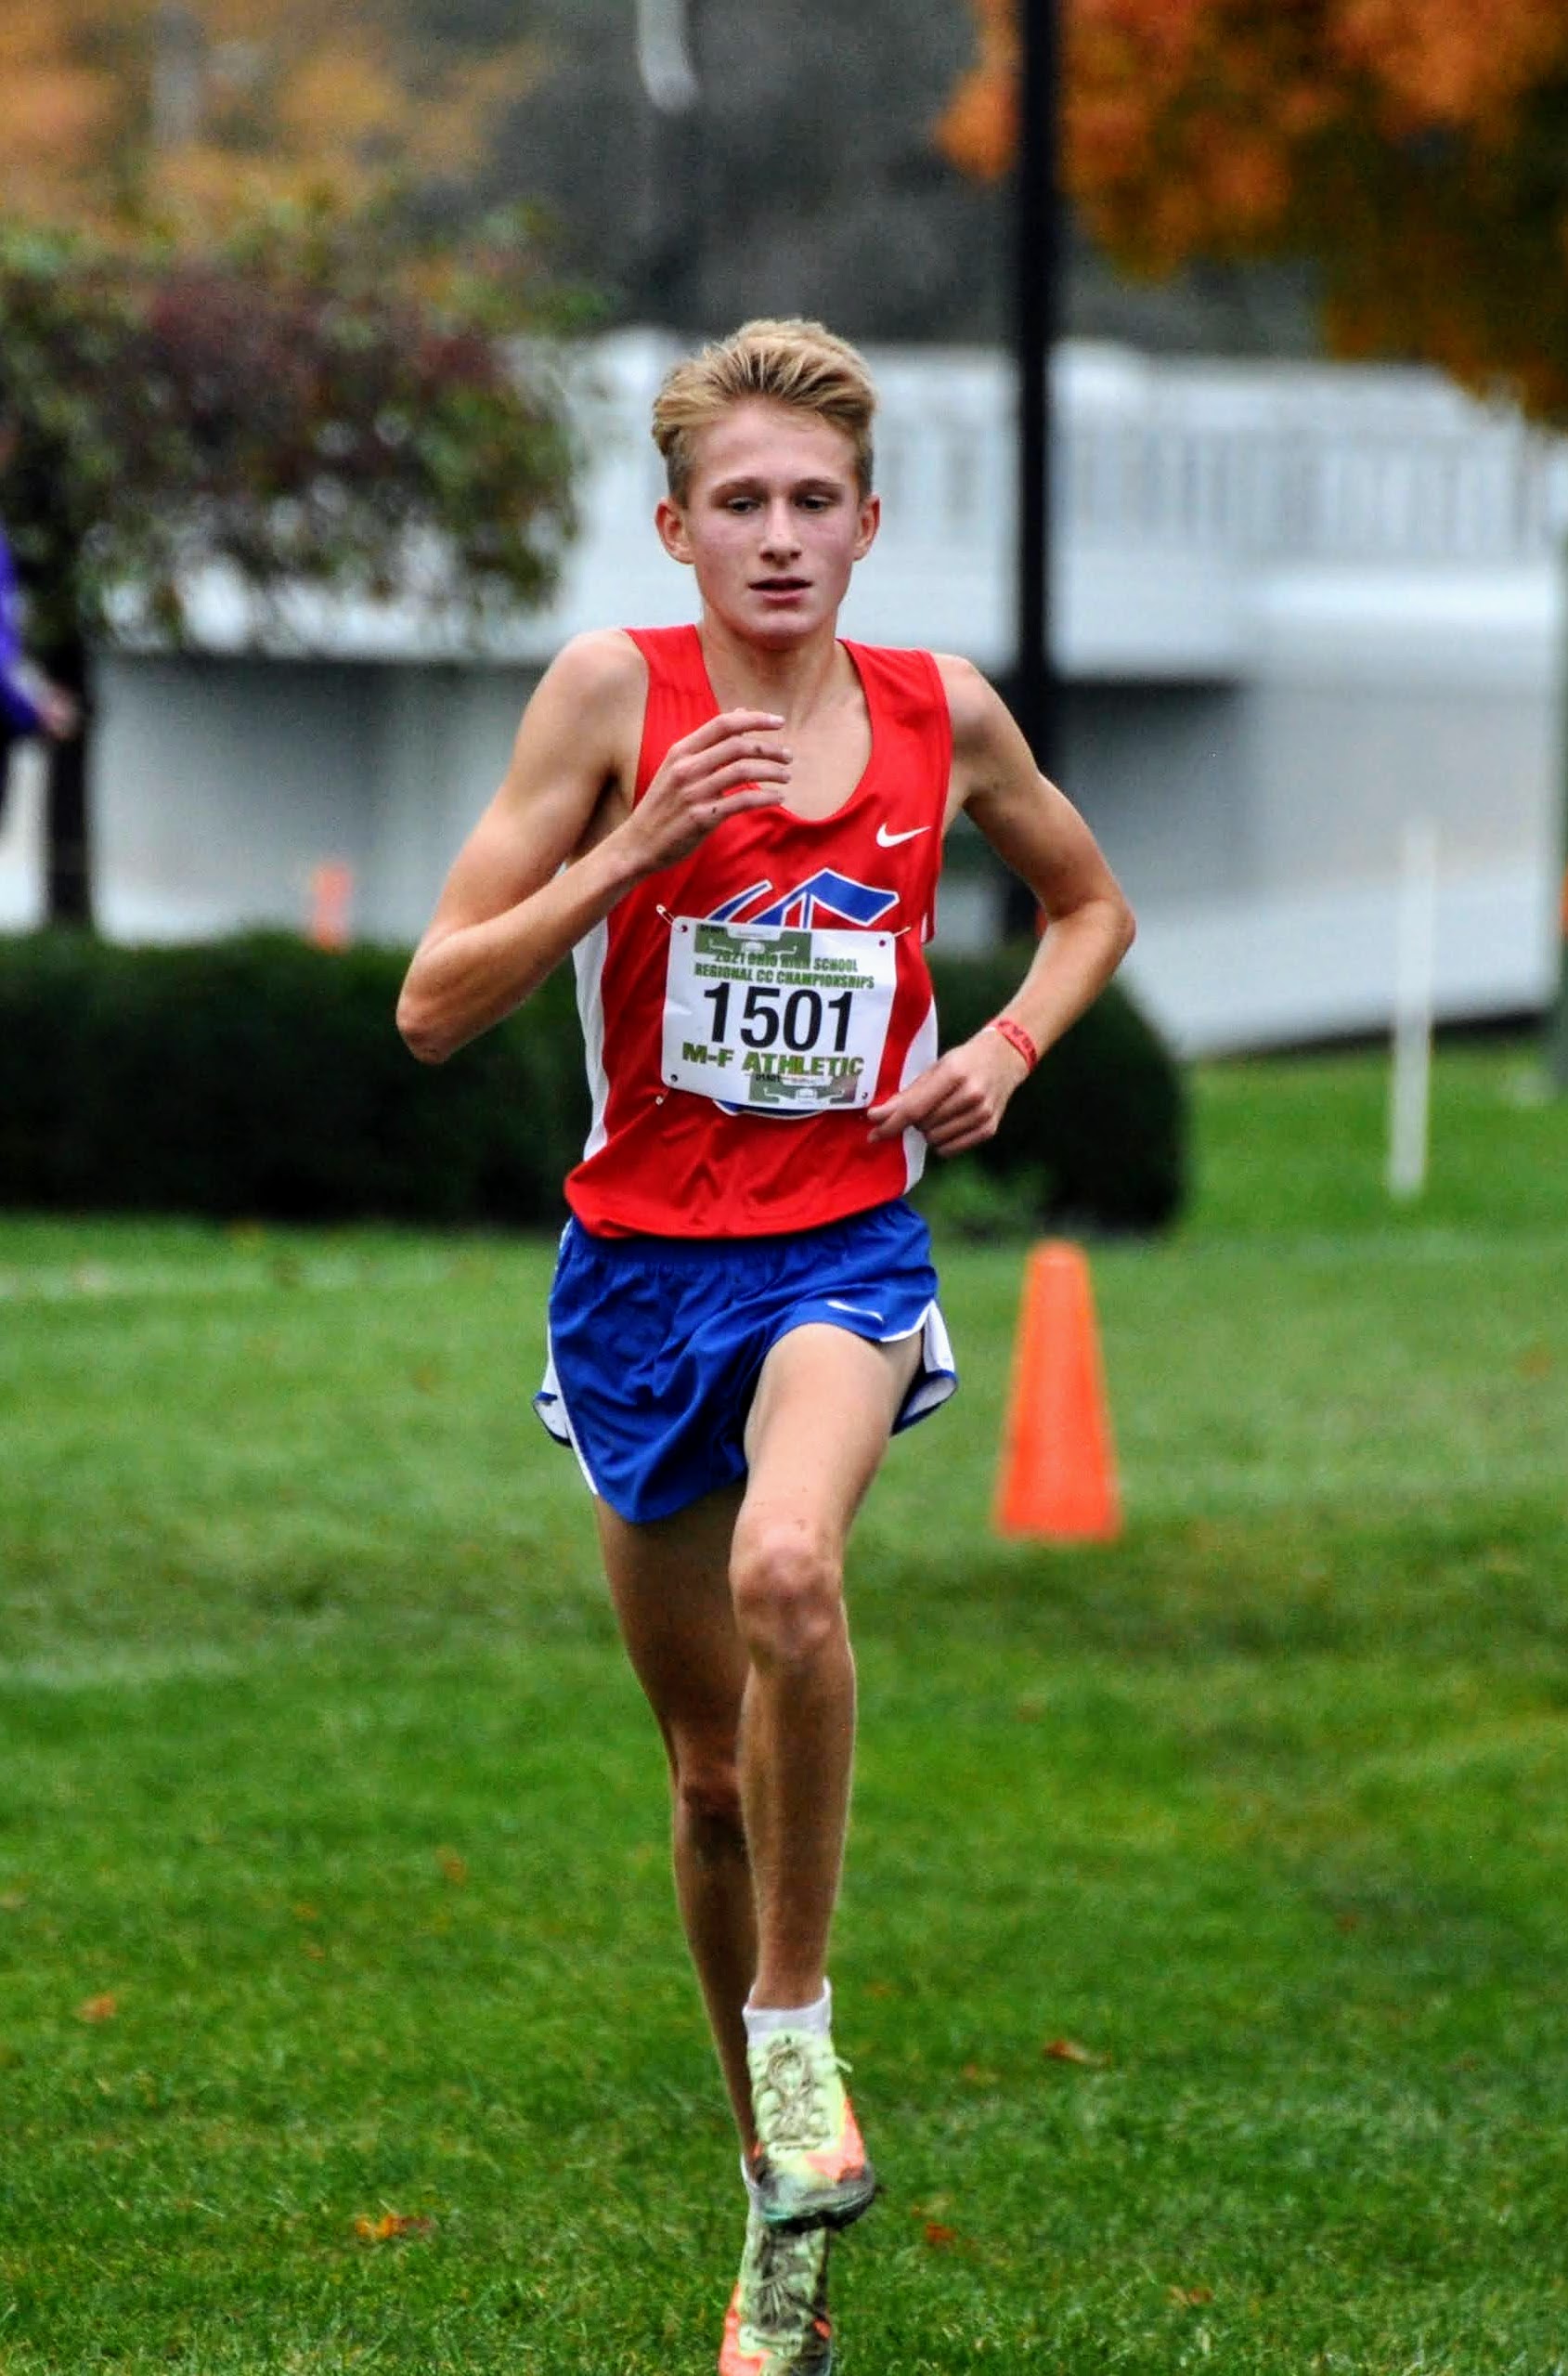 2021 OHSAA Cross Country Regional Champion Jack Agnew